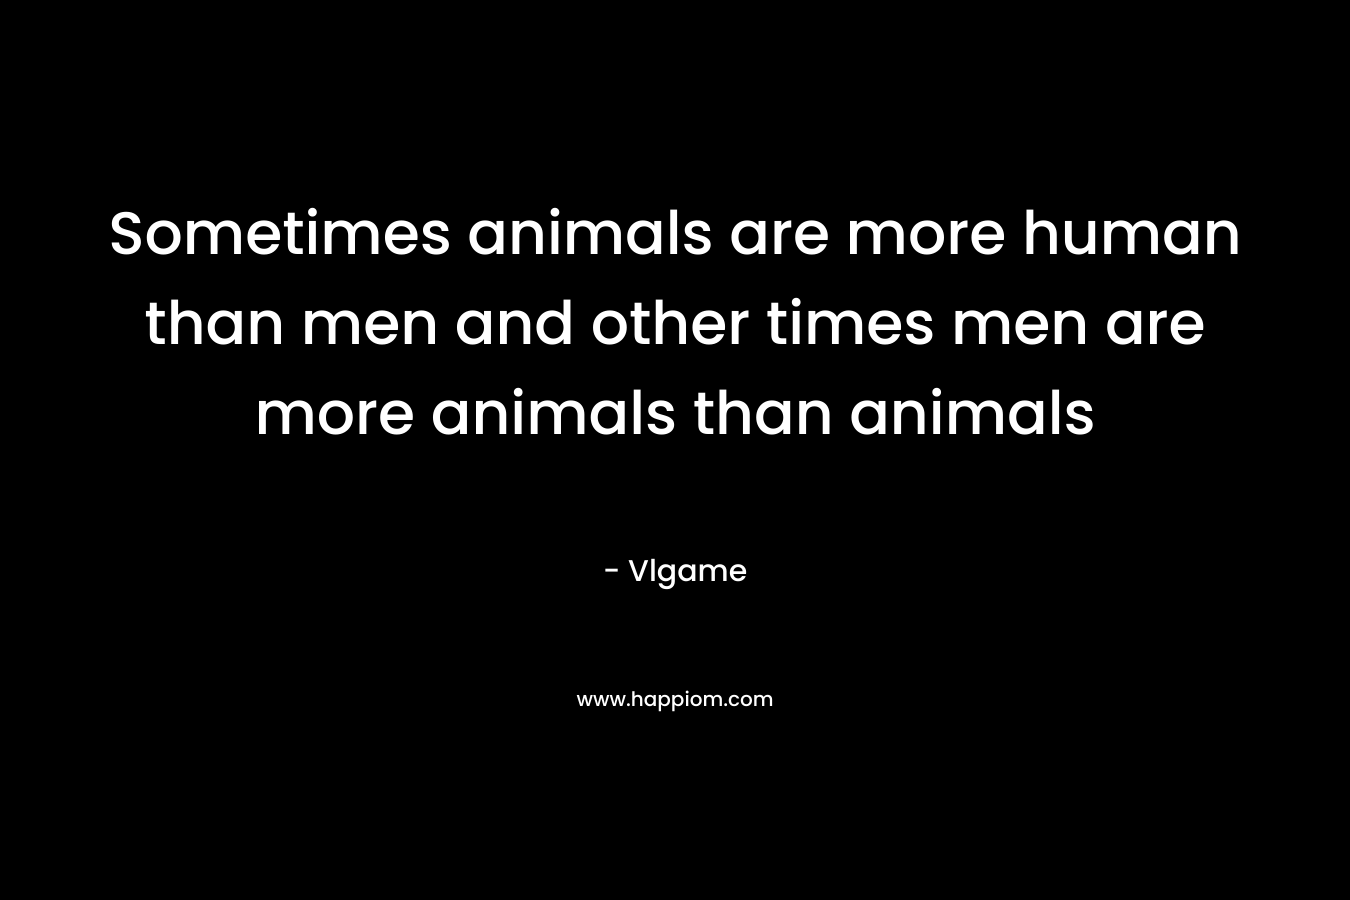 Sometimes animals are more human than men and other times men are more animals than animals